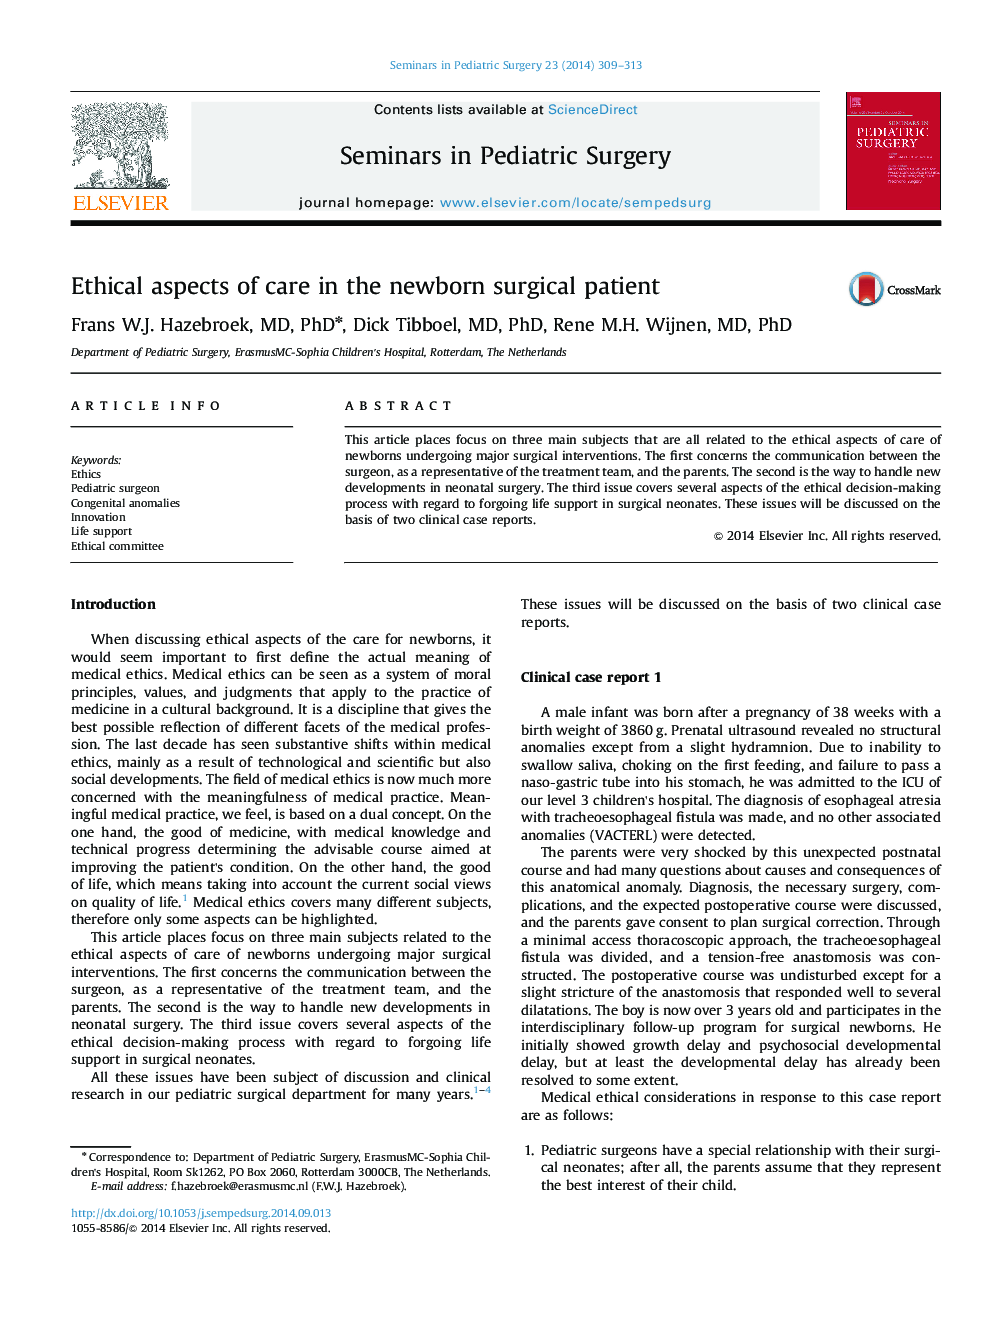 Ethical aspects of care in the newborn surgical patient